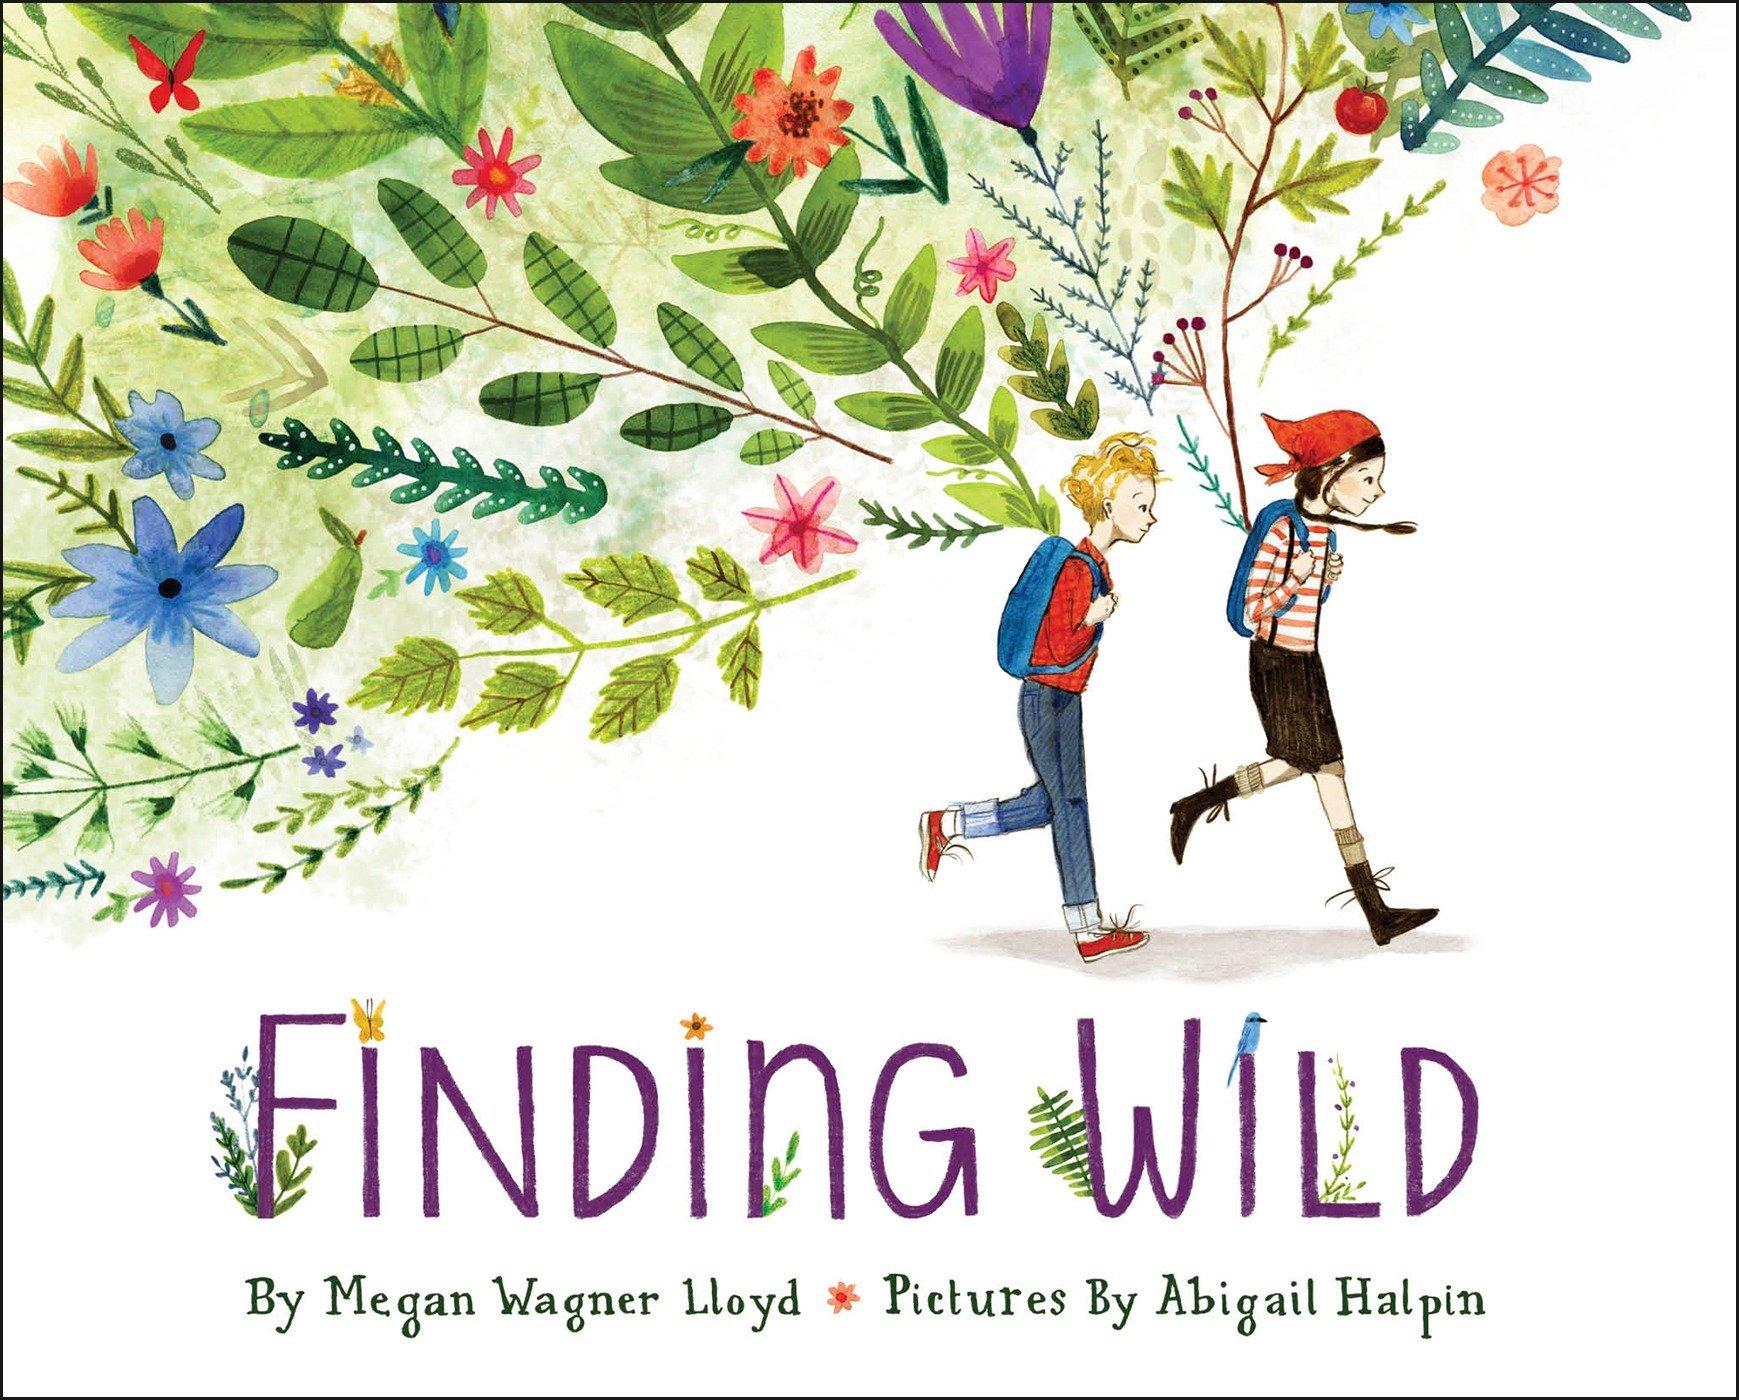 "Finding Wild" book cover by Megan Wagner Lloyd